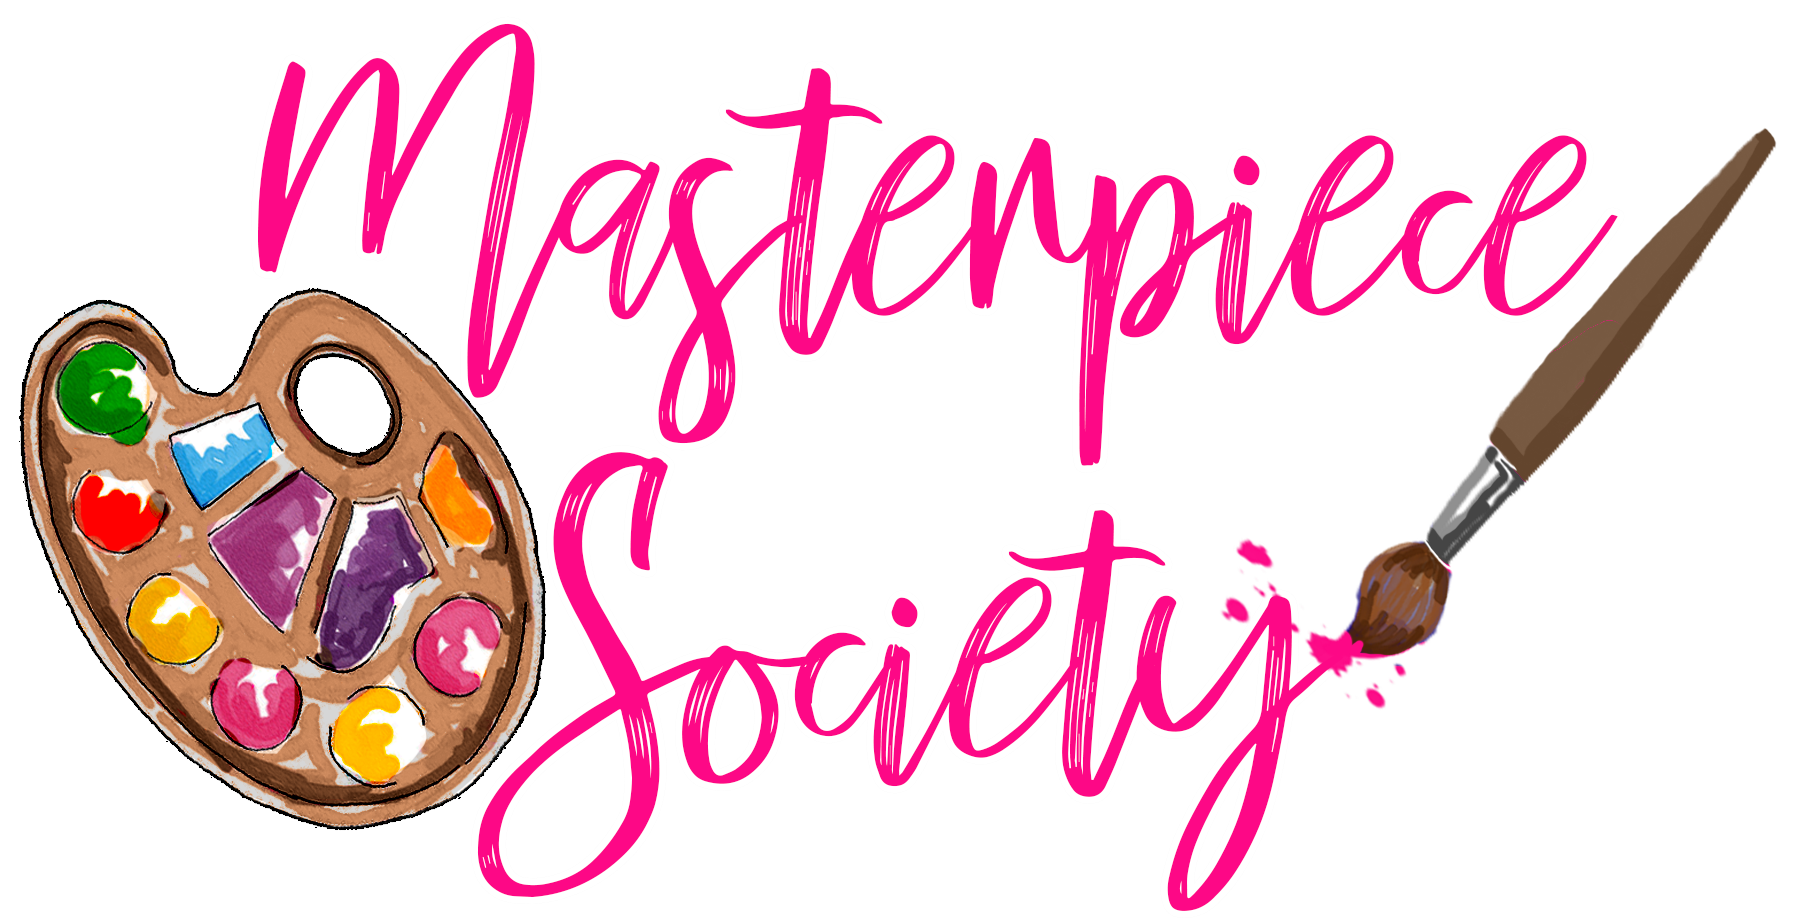 https://masterpiecesociety.com/wp-content/uploads/2022/02/Masterpiece-Society-Logo.png